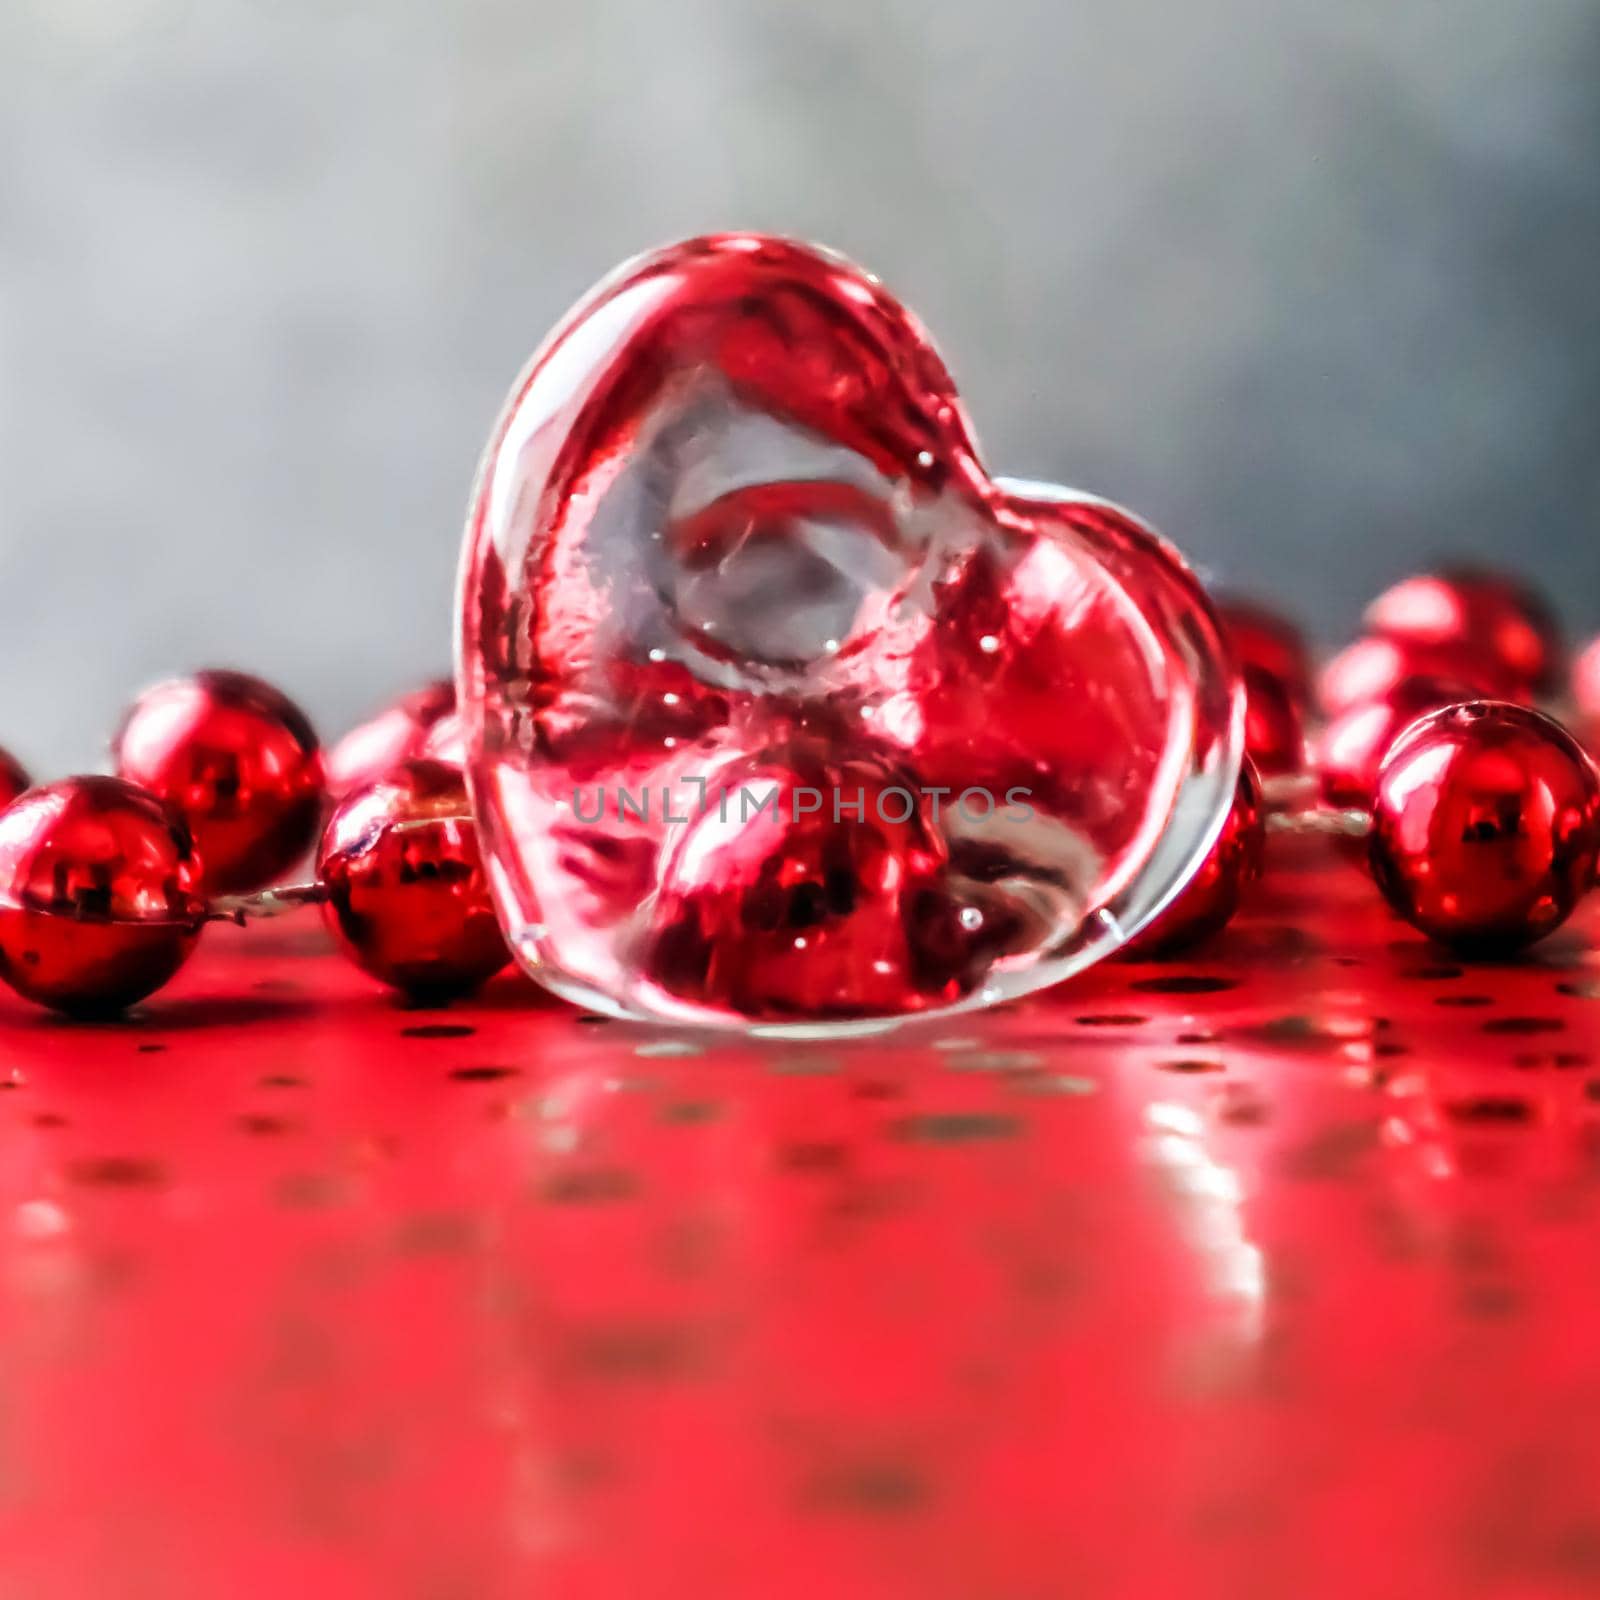 Shining transparent heart and a group of red beads. Perfect Valentine's Day greeting card background. Image in red tone on grey background in a 1x1 format